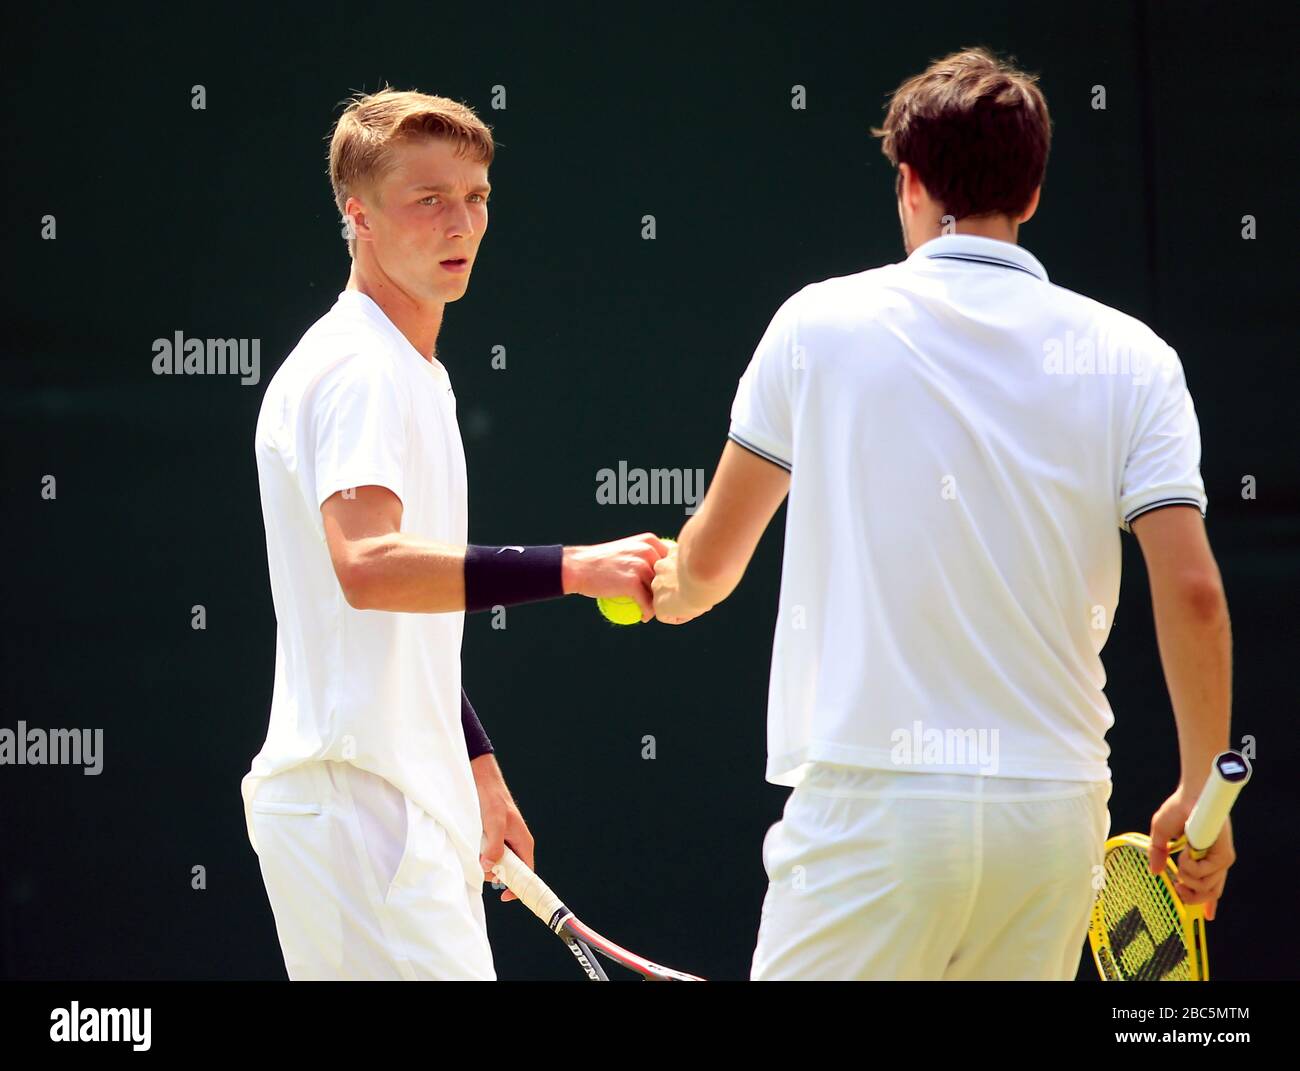 Great Britain's Oliver Golding (right) and Liam Broady during their match against Mexico's Santiago Gonzalez and Germany's Christopher Kas Stock Photo